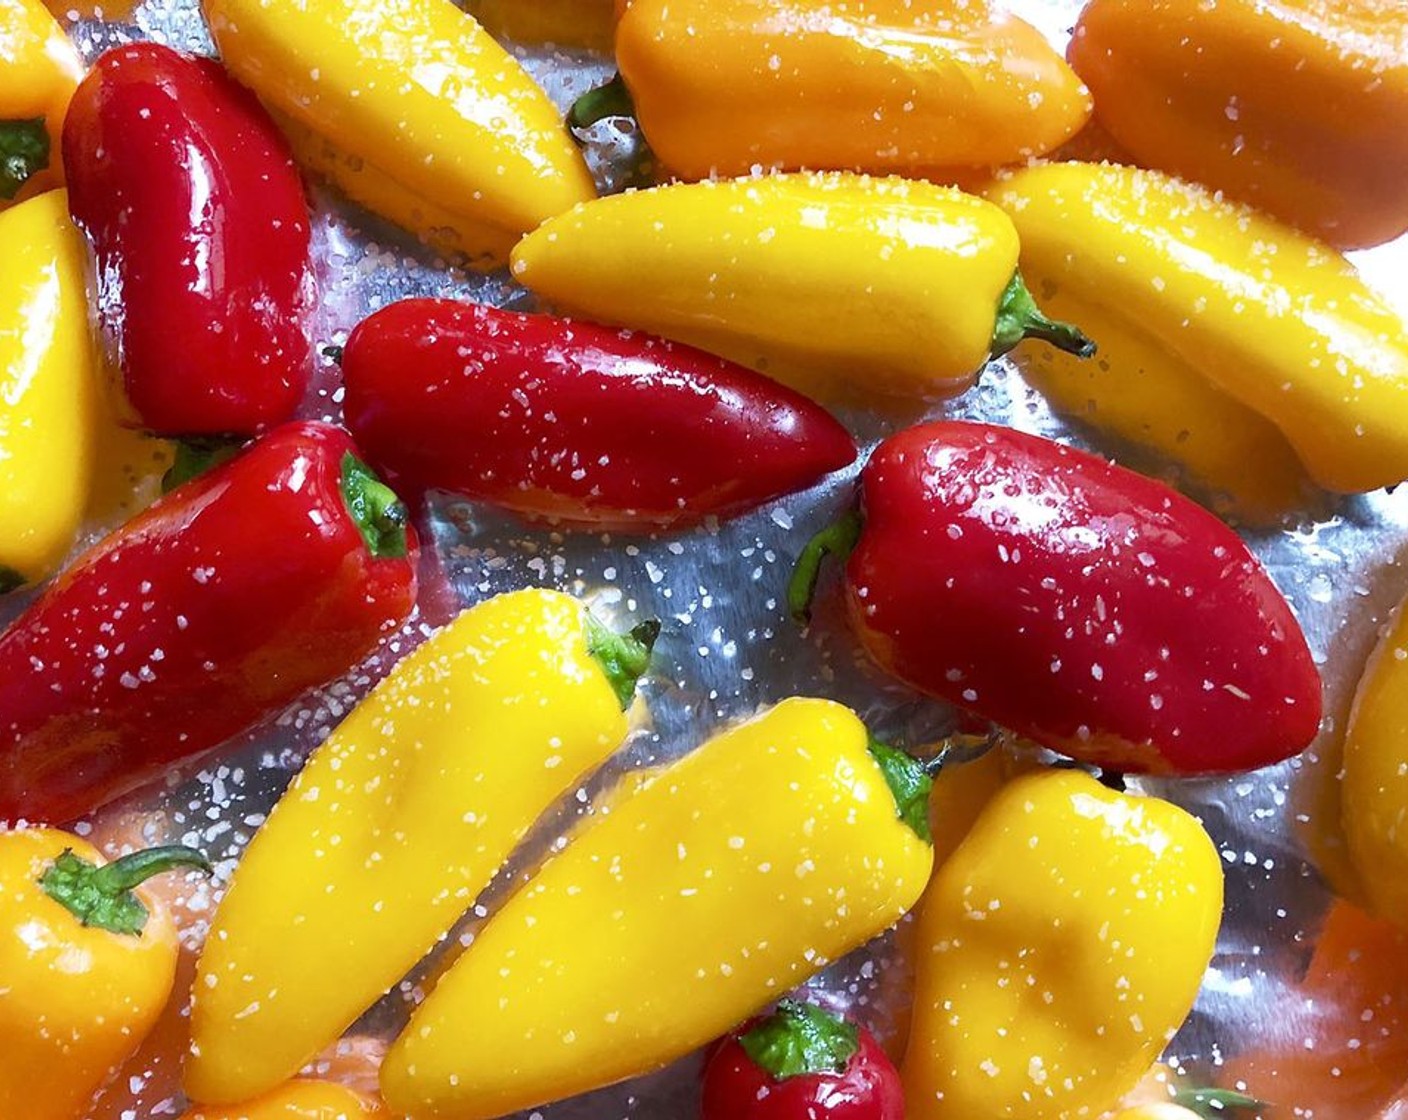 step 2 Toss the Bell Peppers (2 pckg) with Olive Oil (1 Tbsp) and Kosher Salt (1/2 tsp), arrange them in a single layer on an aluminum foil-lined rimmed baking sheet. Broil until the tops are lightly charred, about 5-7 minutes. Let cool to room temperature for half an hour.